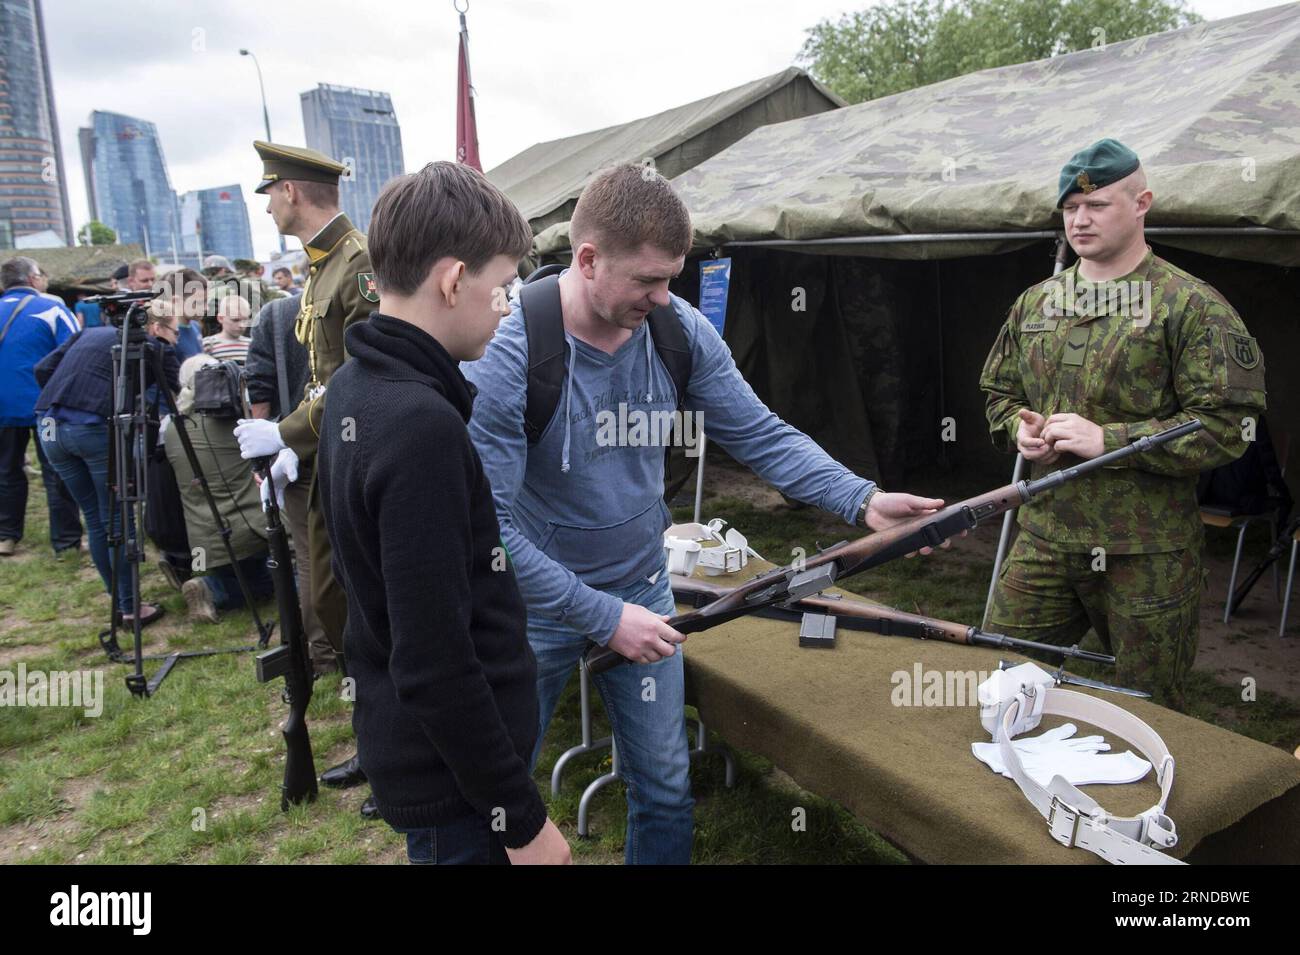 (160515) -- VILNIUS, May 14, 2016 -- People are viewing weapons in Vilnius, Lithuania, May 14, 2016. Lithuania celebrates Armed Forces and Public Unity Day in it s captial on Saturday. Troops of Lithuania, Germany, U.S., Luxembourg, Portugal, etc. brought their light weapons, military vehicles and other equipment to the public. Fighting Falcon F-16 of Portuguese air force and Black Hawk of the U.S. air force participated in the performance. ) LITHUANIA-VILNIUS-ARMED FORCES AND PUBLIC UNITY DAY AlfredasxPliadis PUBLICATIONxNOTxINxCHN   160515 Vilnius May 14 2016 Celebrities are VIEWING Weapons Stock Photo